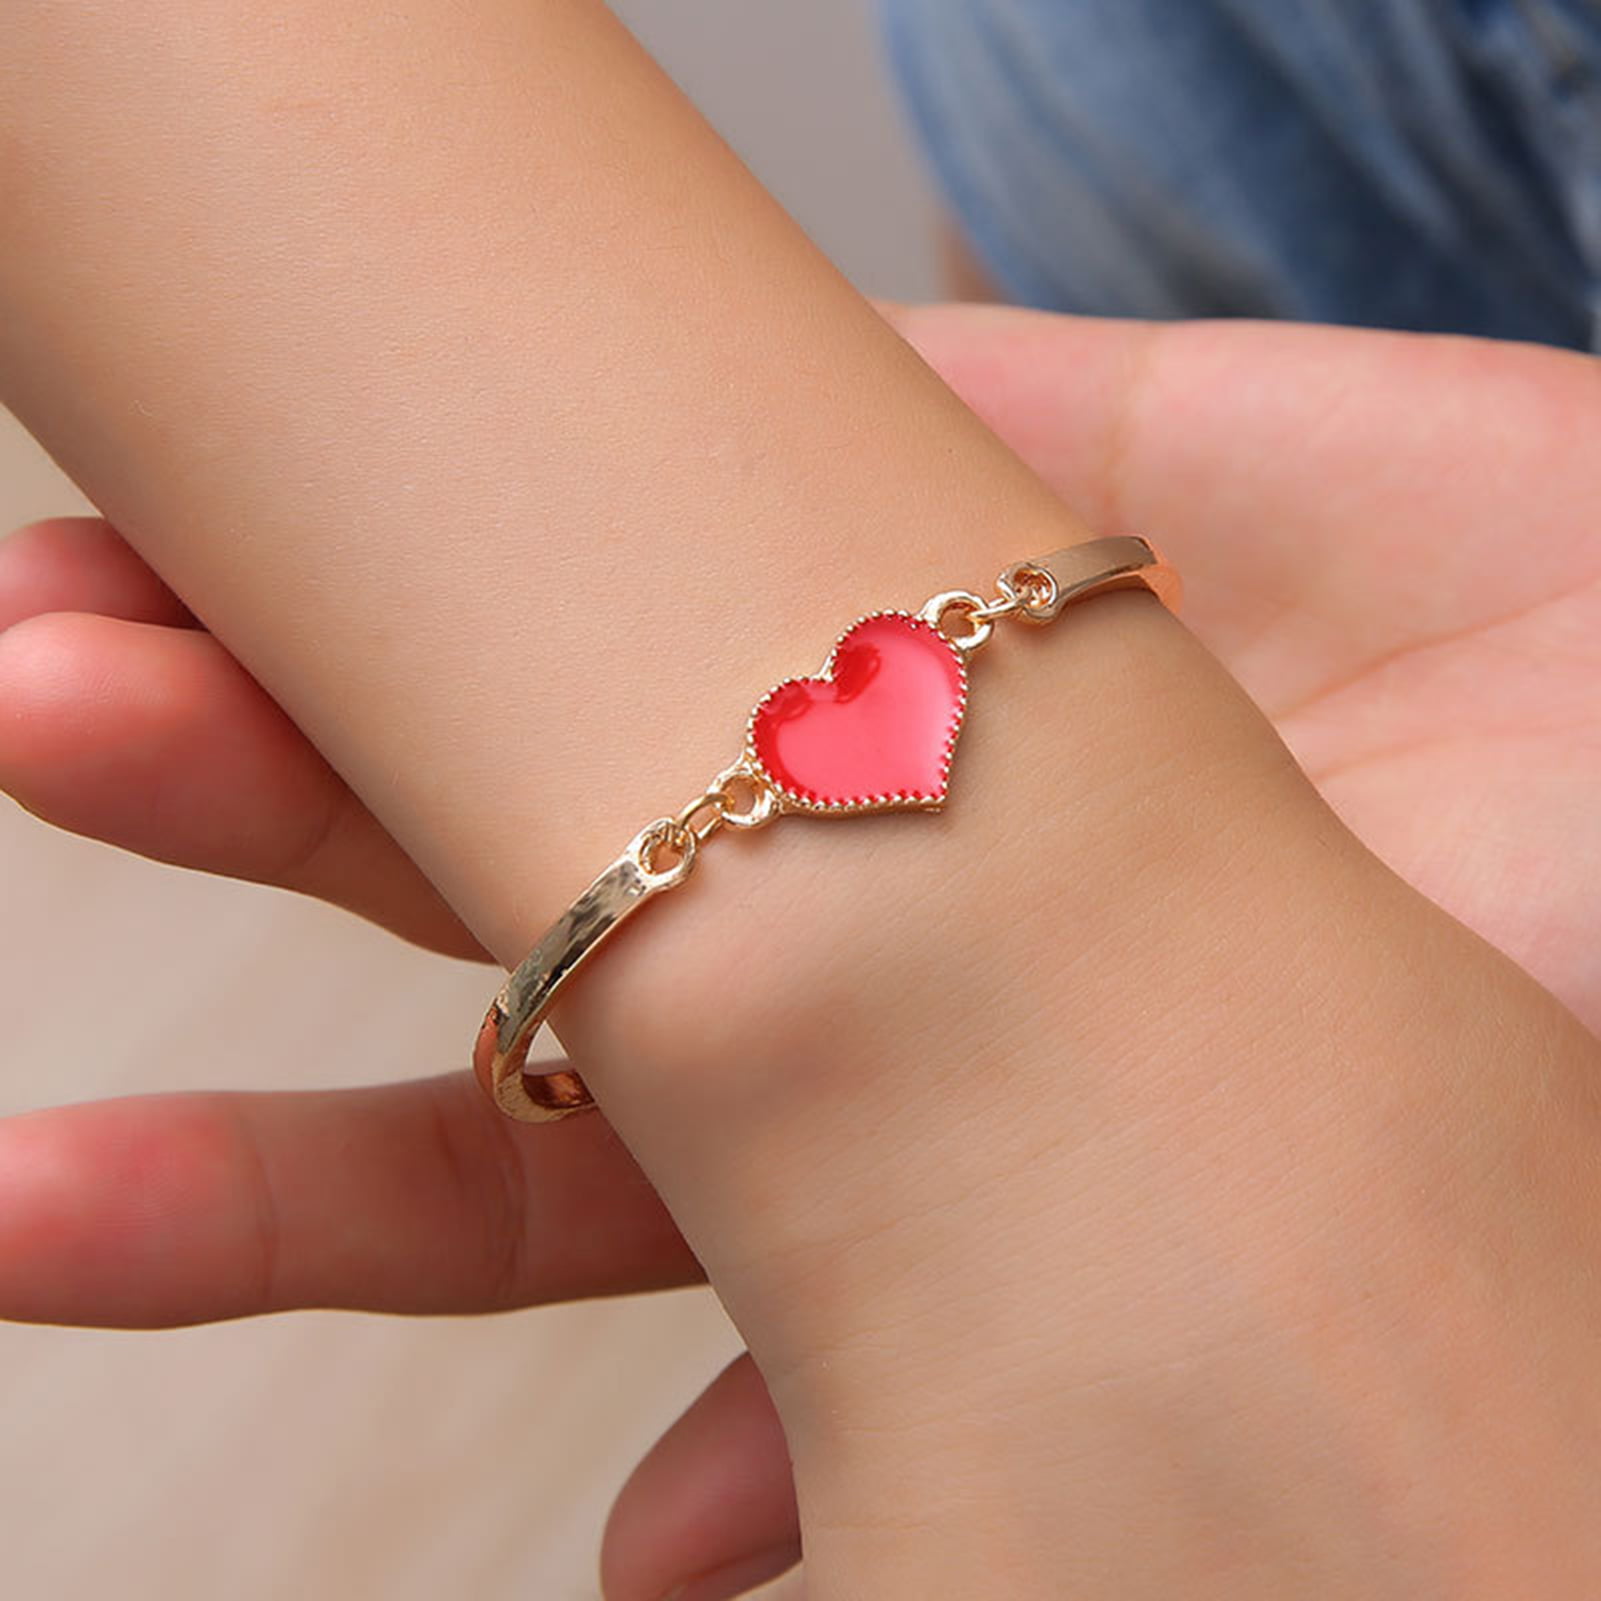 Dress Choice Simple Adjustable Braided Heart Shaped Bracelet With